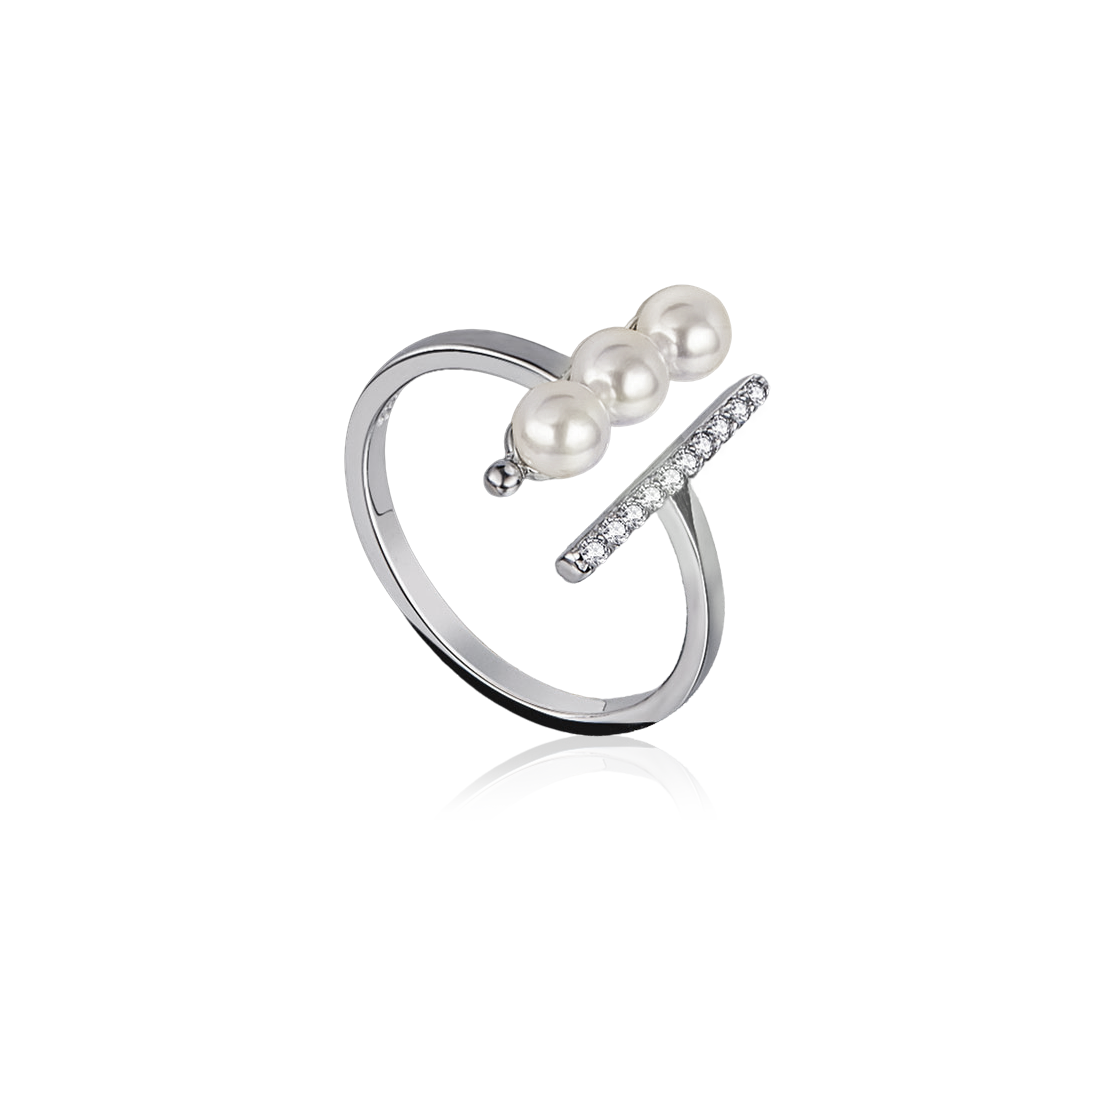 Sabrina Ring – Silver with Freshwater Pearls